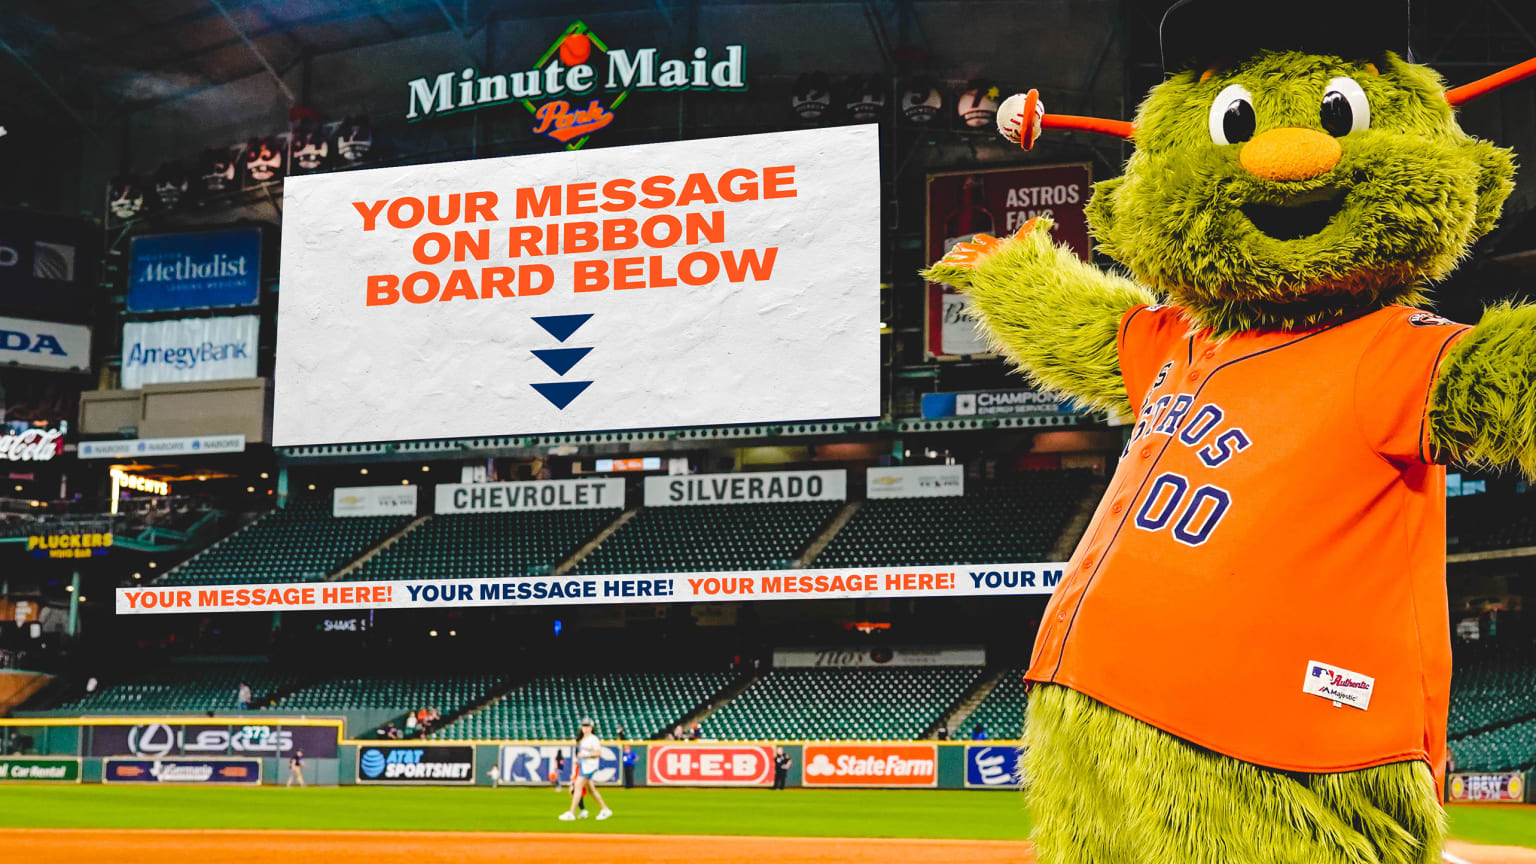 Astros Ribbon Board Messages